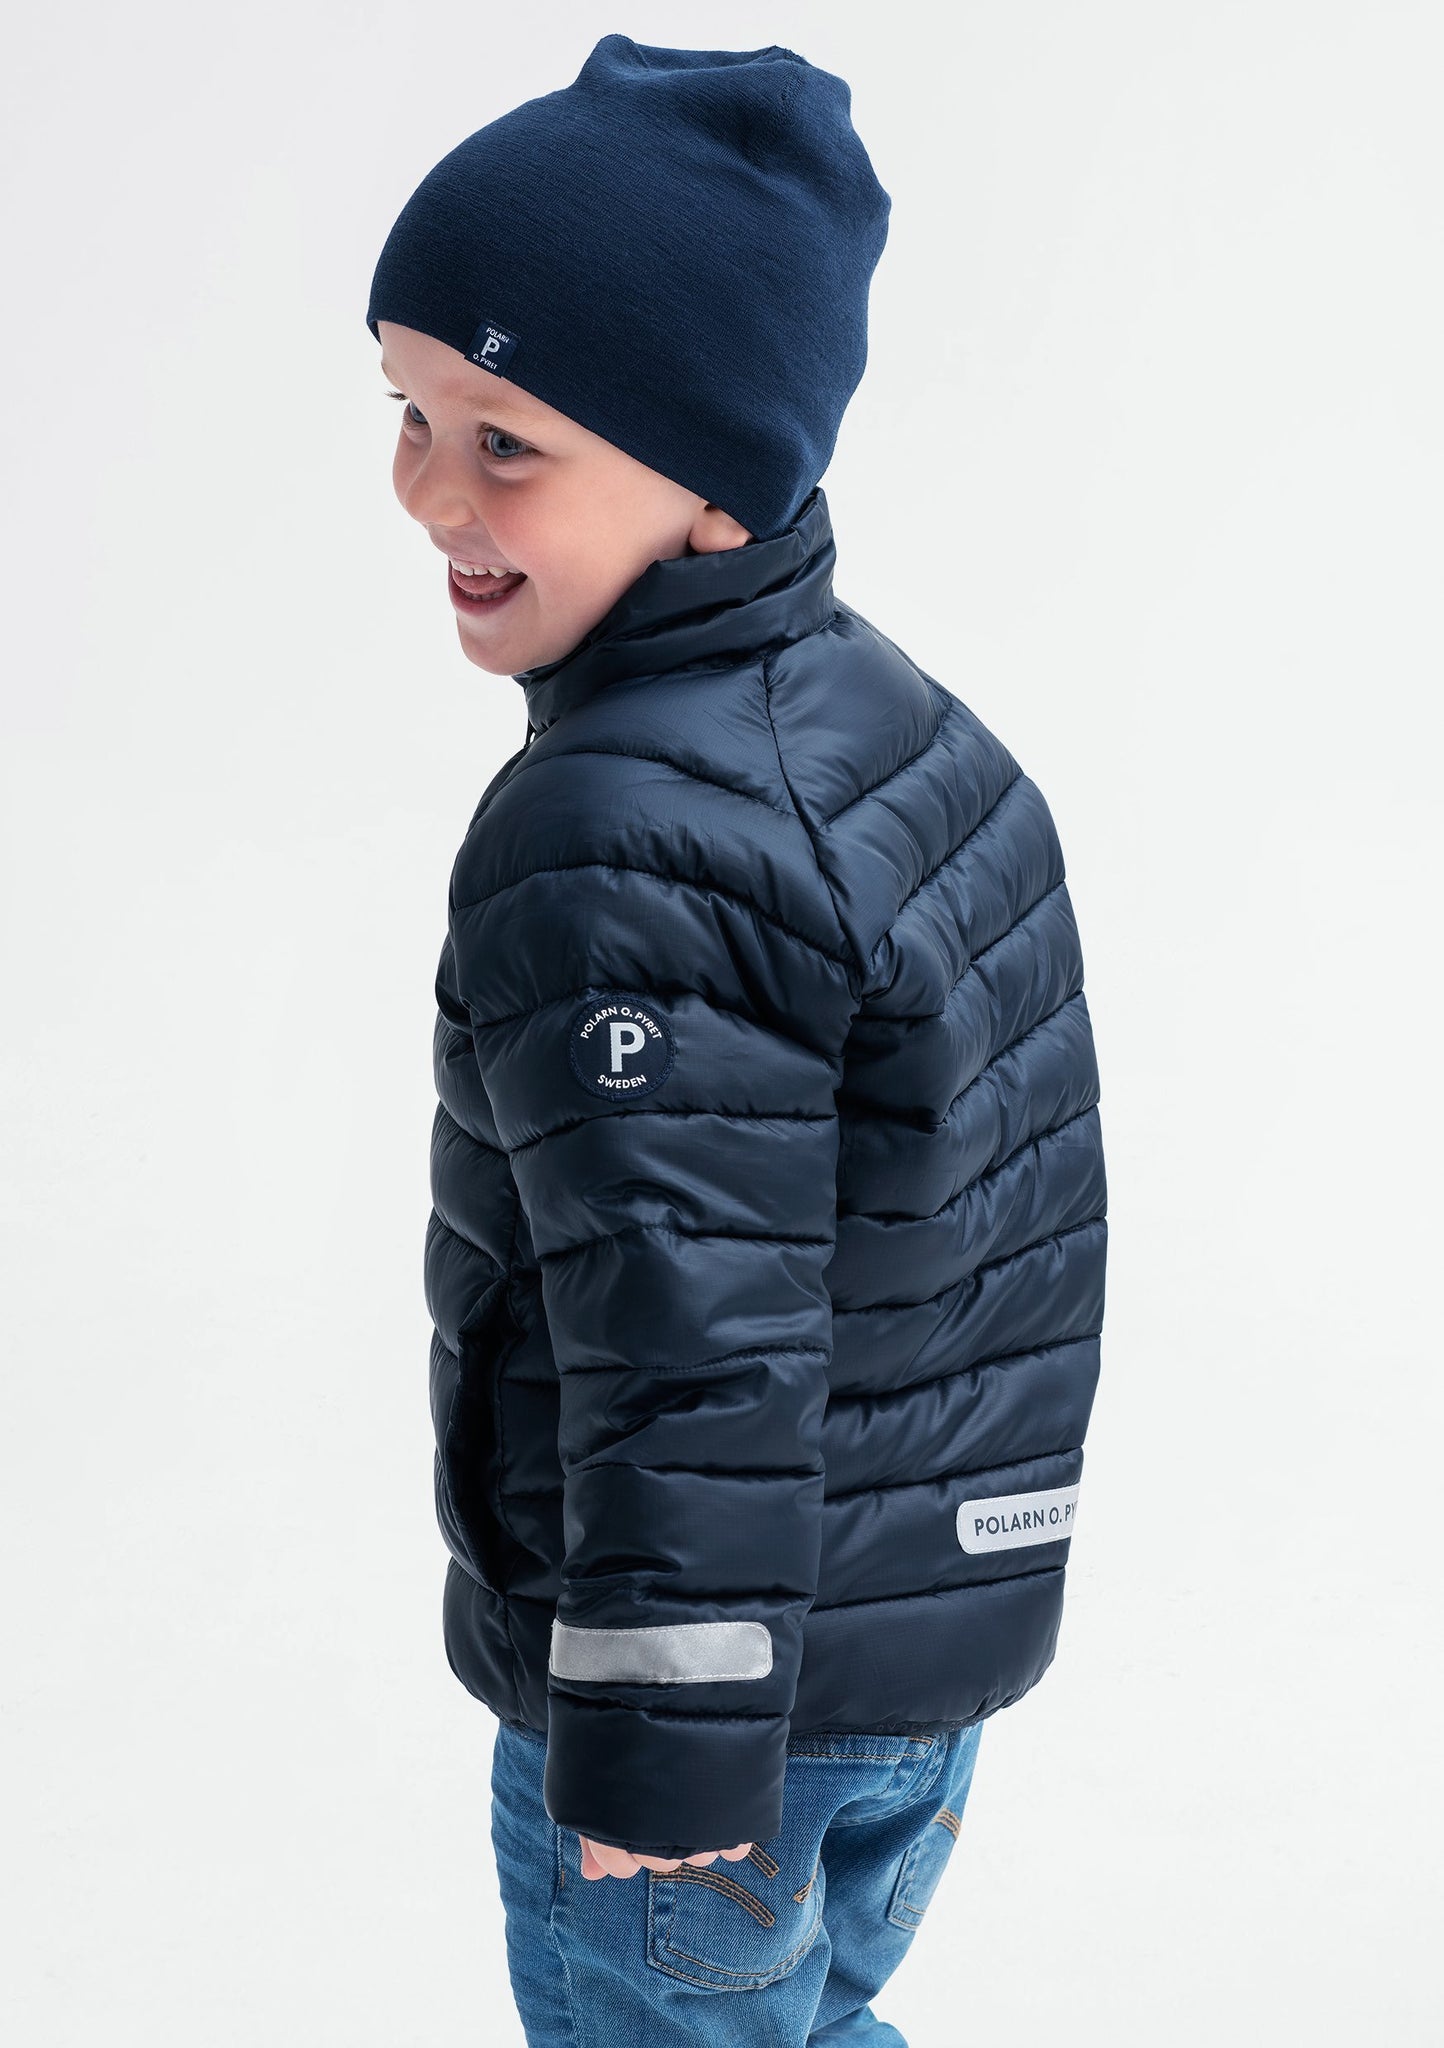 boy wearing navy water resistant kids puffer jacket, recycled materials, warm and comfortable, ethical long lasting polarn o. pyret